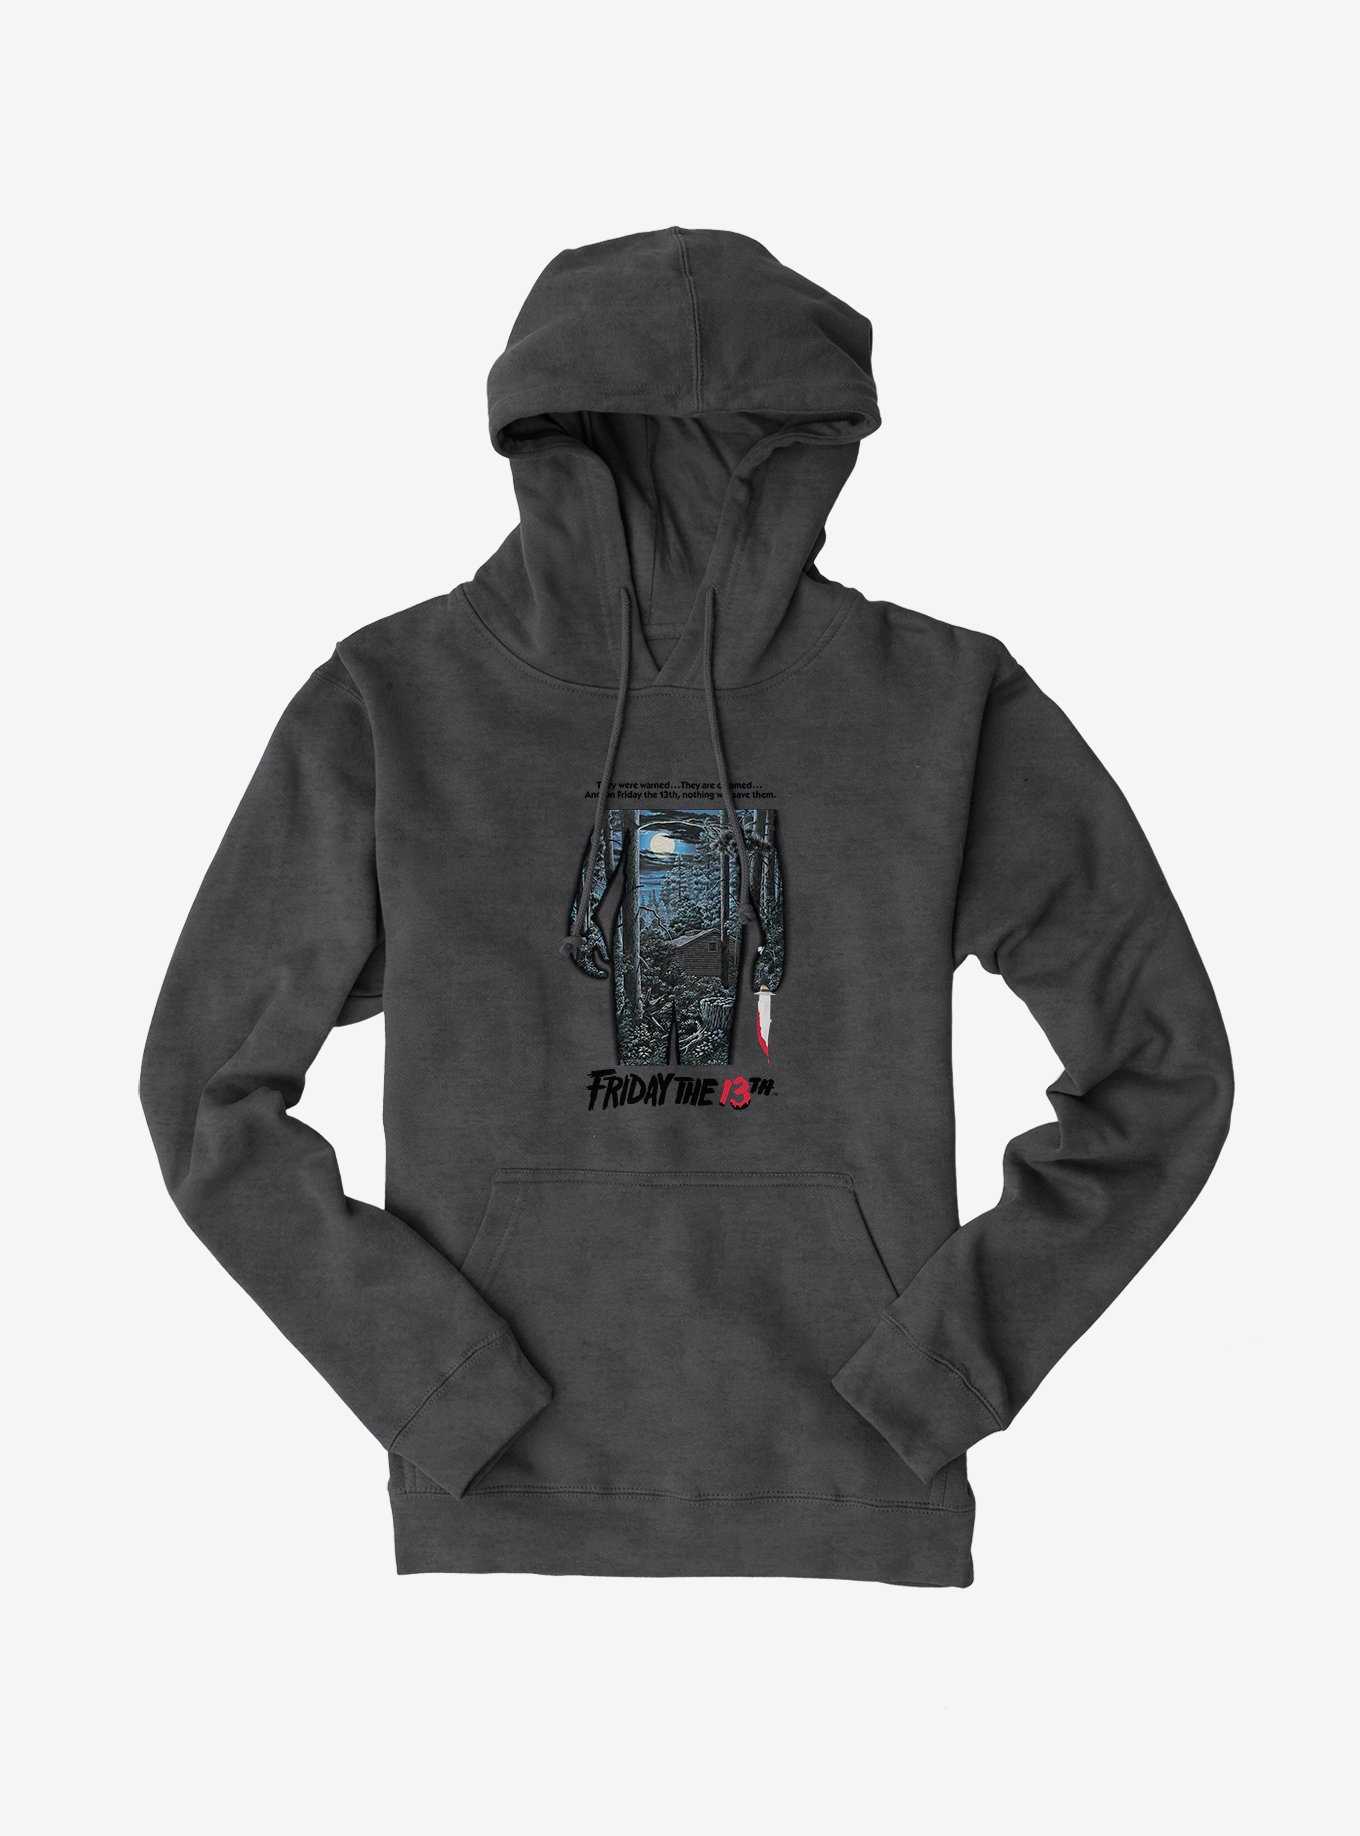 Friday The 13th Poster Hoodie, CHARCOAL HEATHER, hi-res